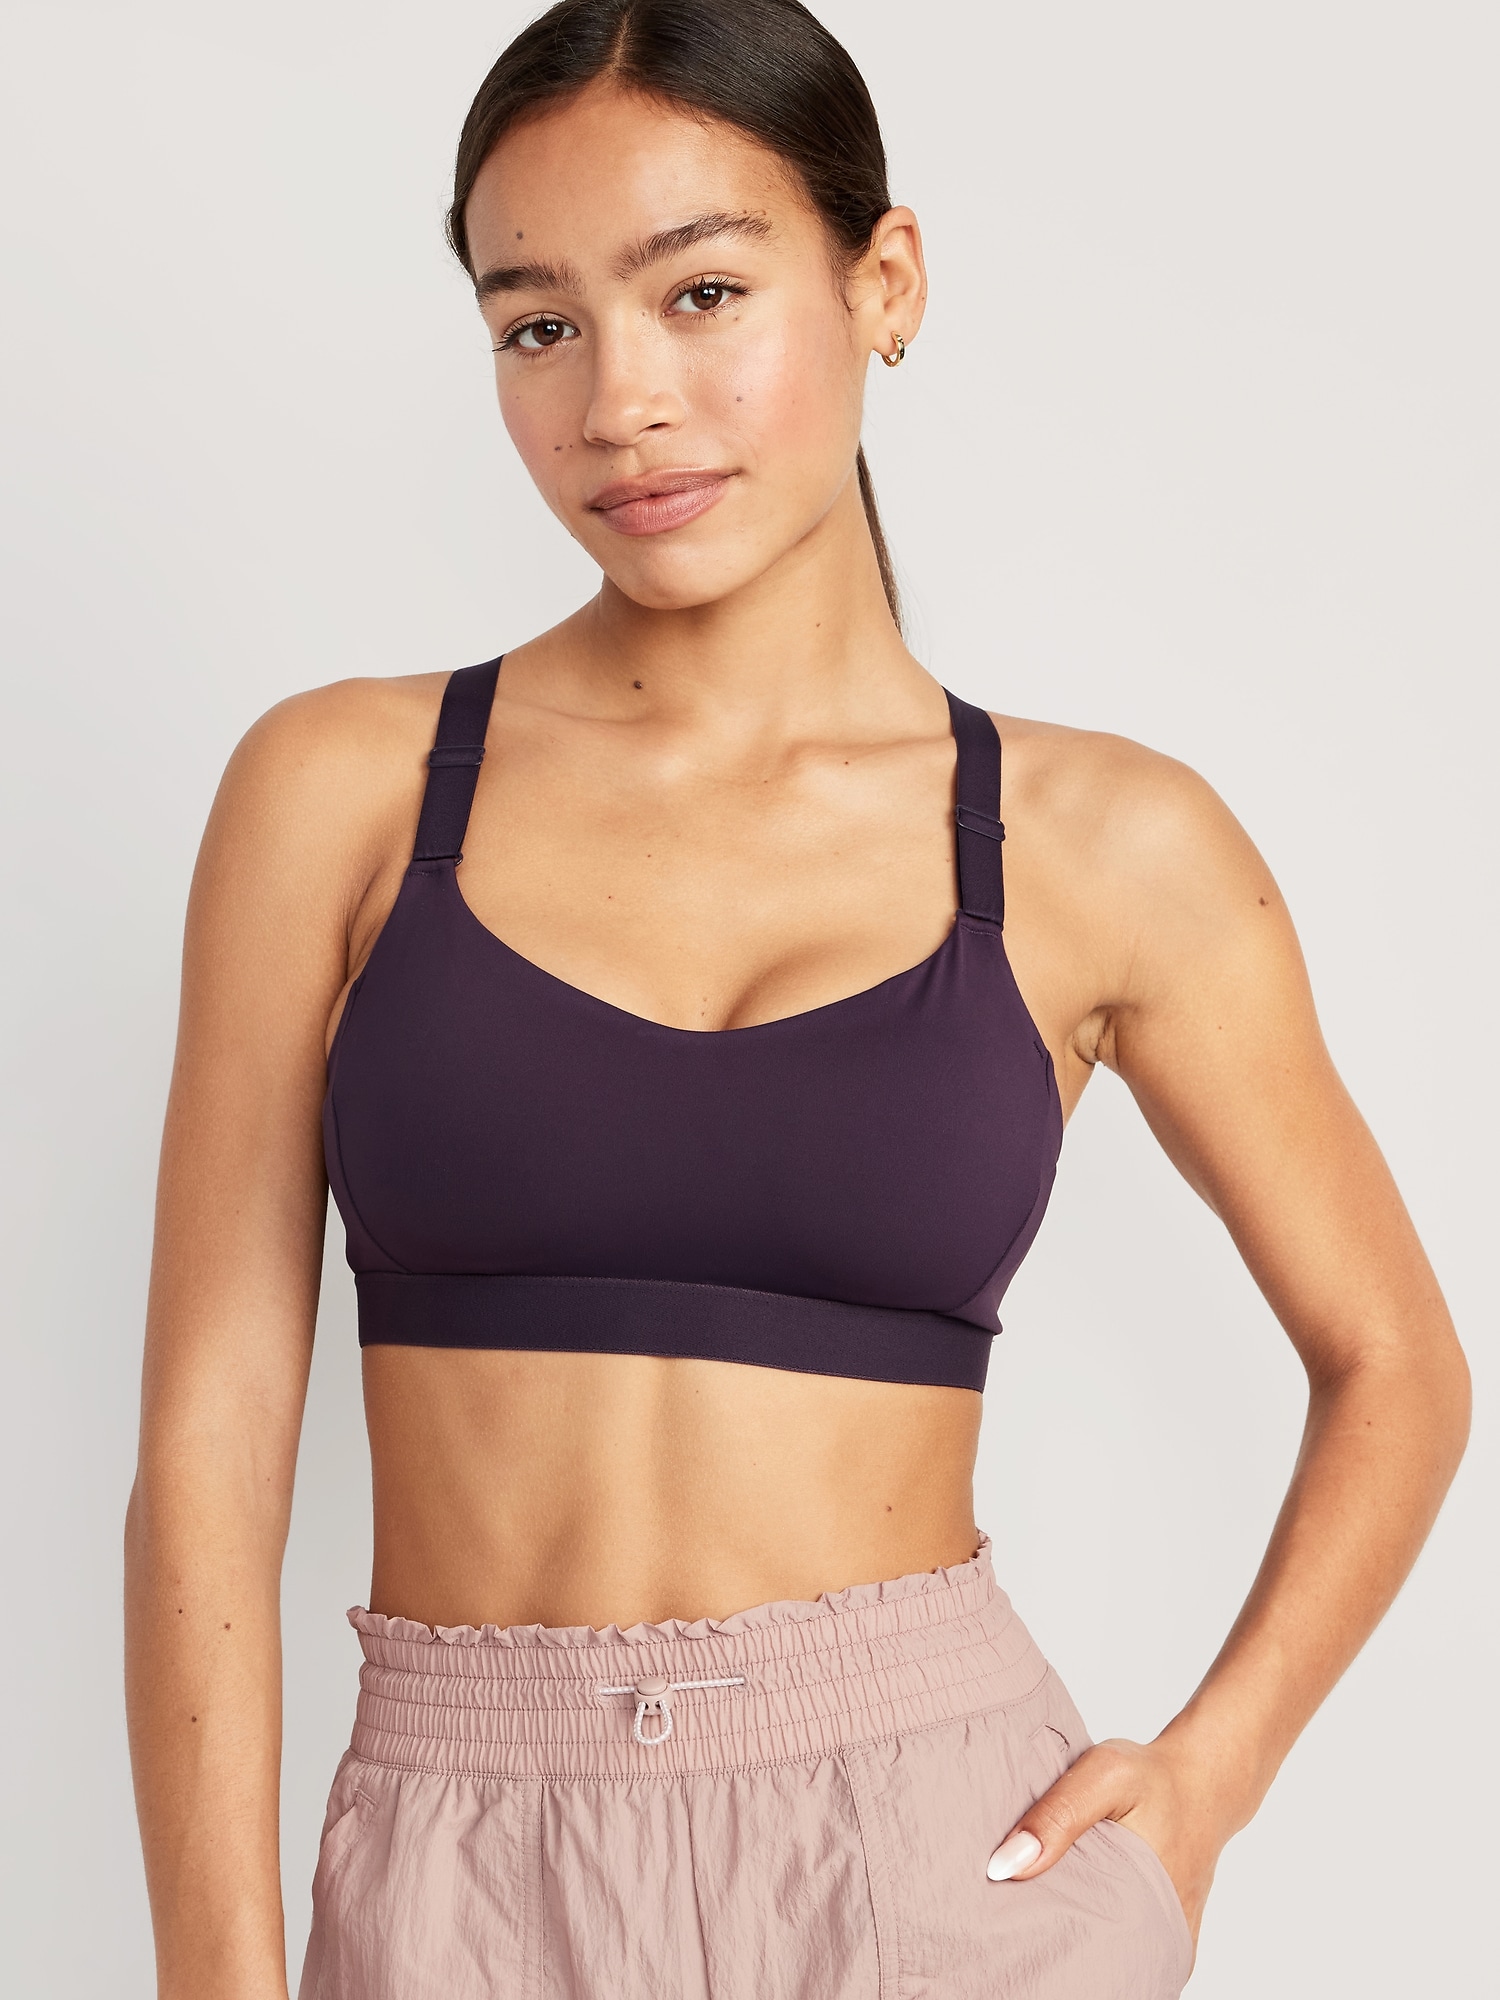 Women's Sports Bras with Adjustable Straps